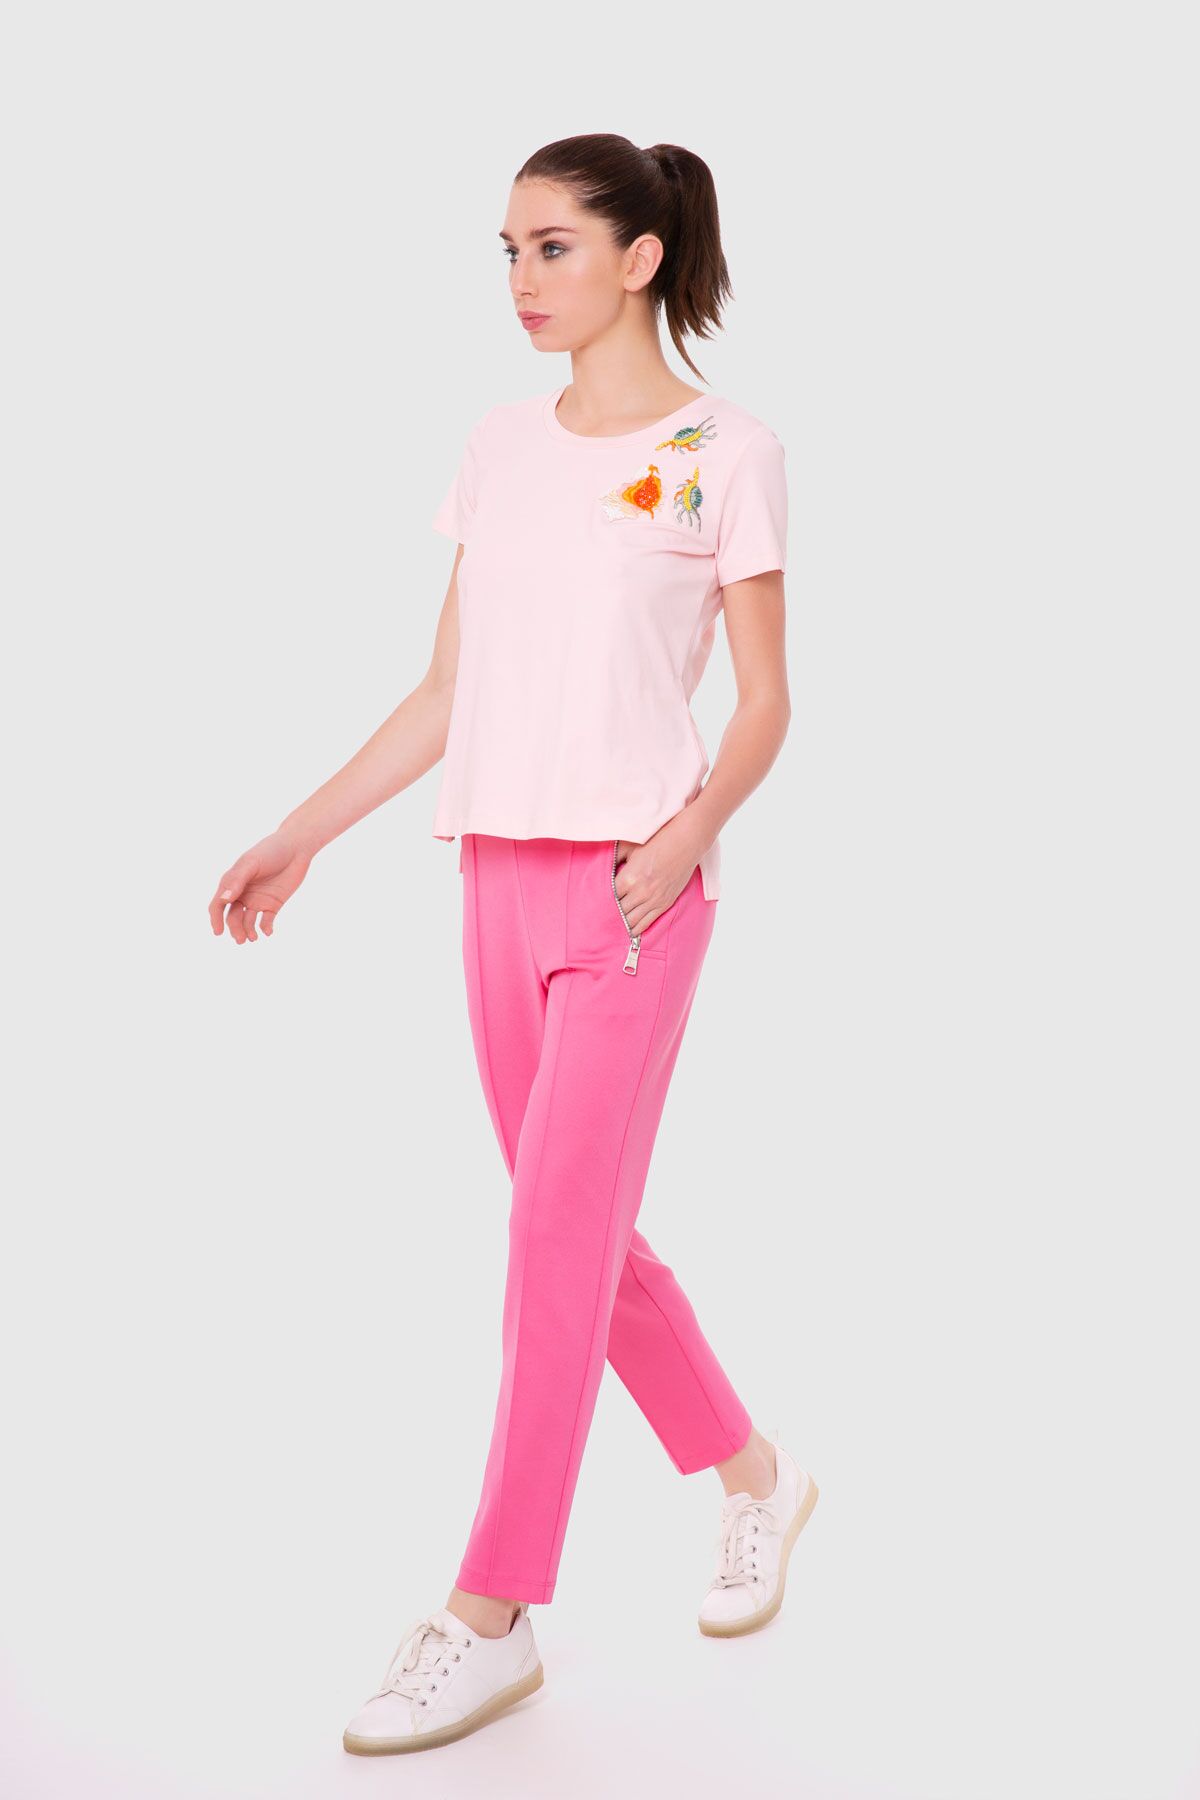 GIZIA - Round Neck Pink T-Shirt with Embroidery Appliqués